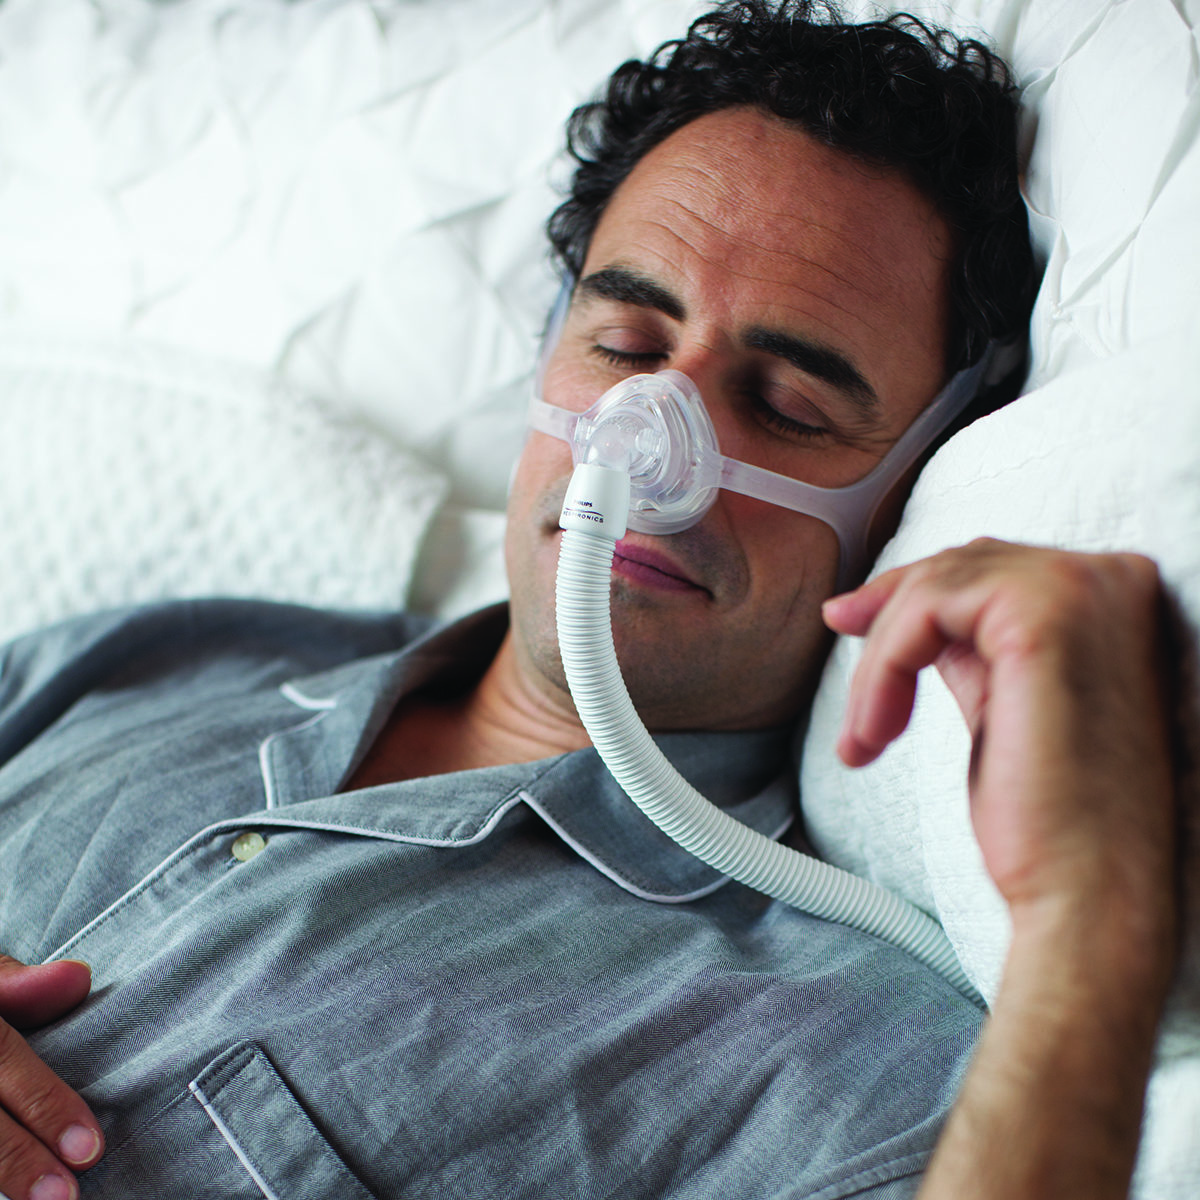 Get better sleep with CPAP therapy